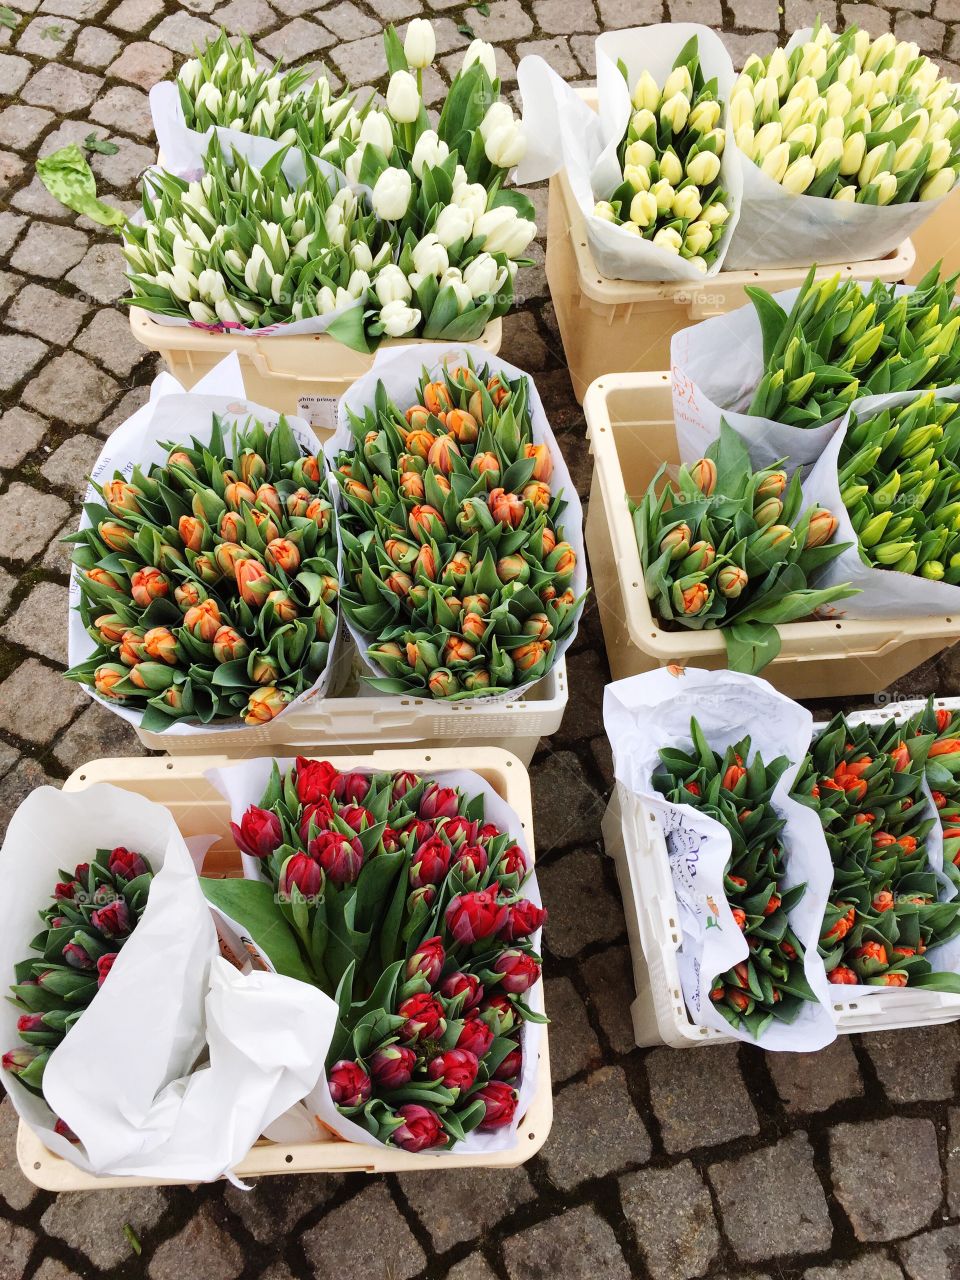 Spring is just around the corner - Bunches of colorful tulips on the floor 